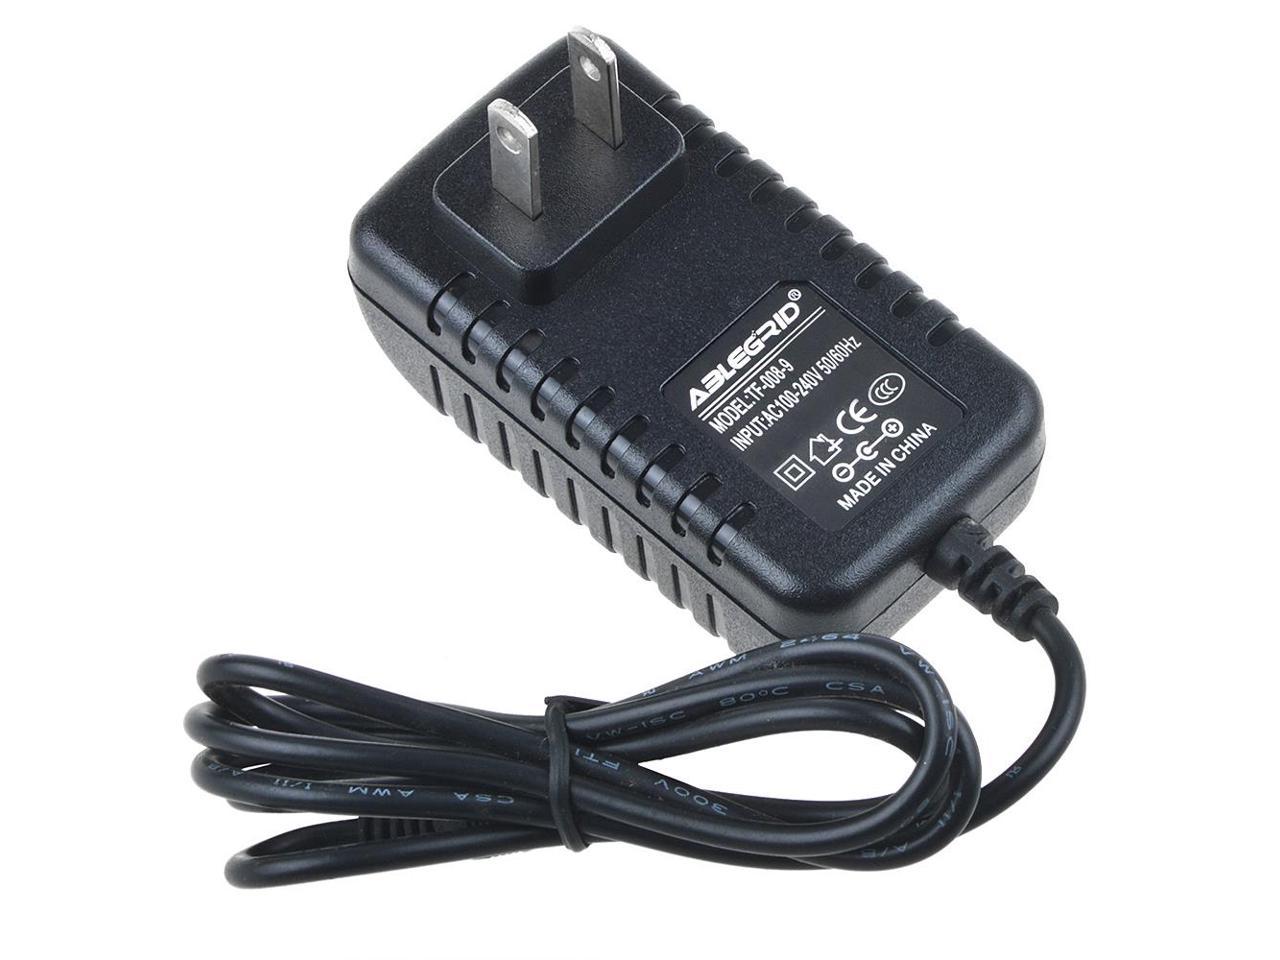 DPS-90GB A DPS-90GBA Switching Power Supply Cord Accessory USA AC DC Adapter for Delta Electronics Model